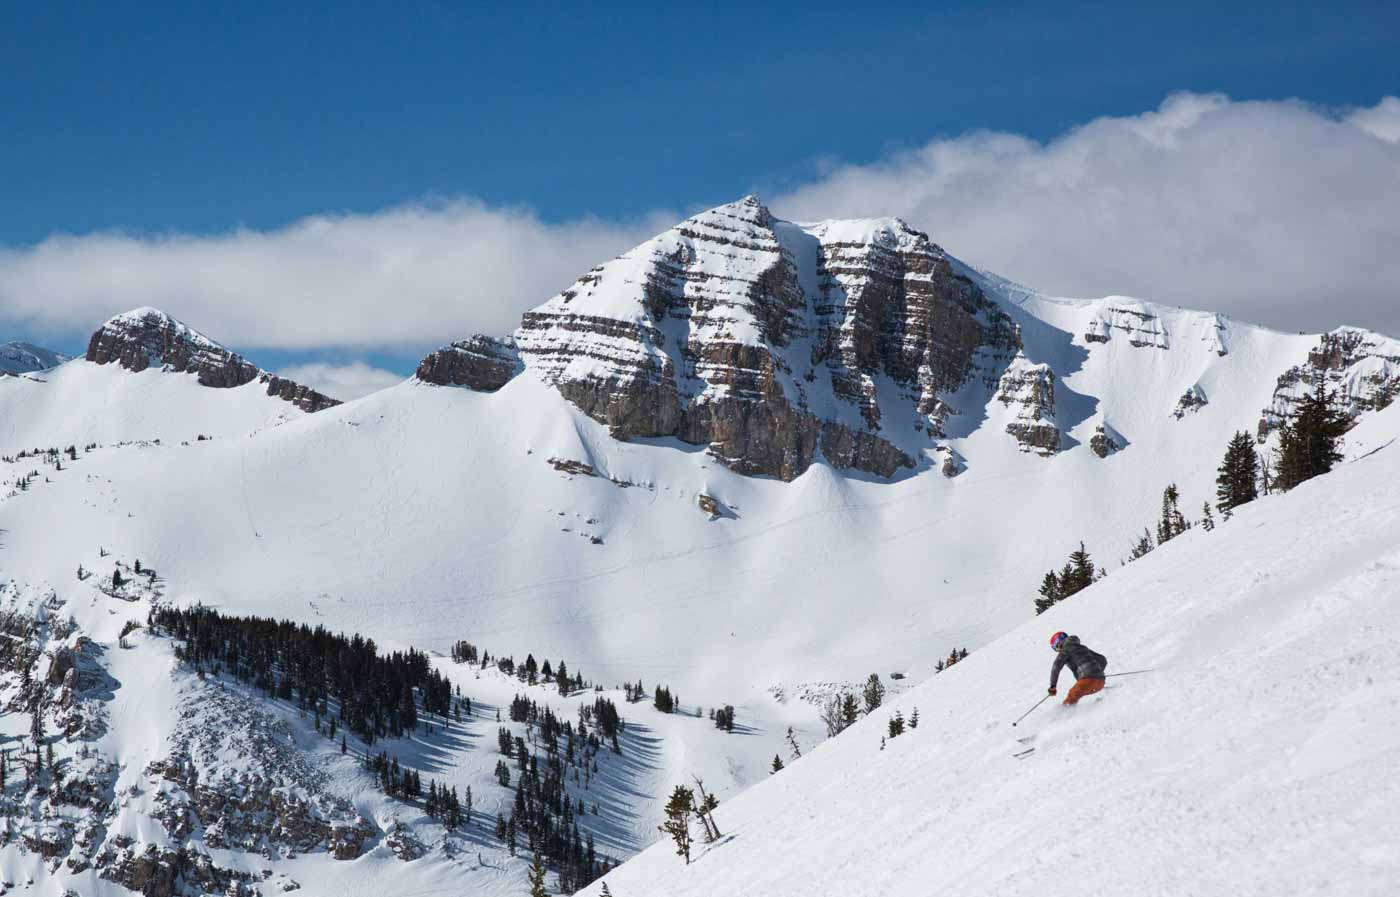 Amangani, Usa Activities, Skiing Rendezvous Bowl With View Of Cody Peak At Jhmr